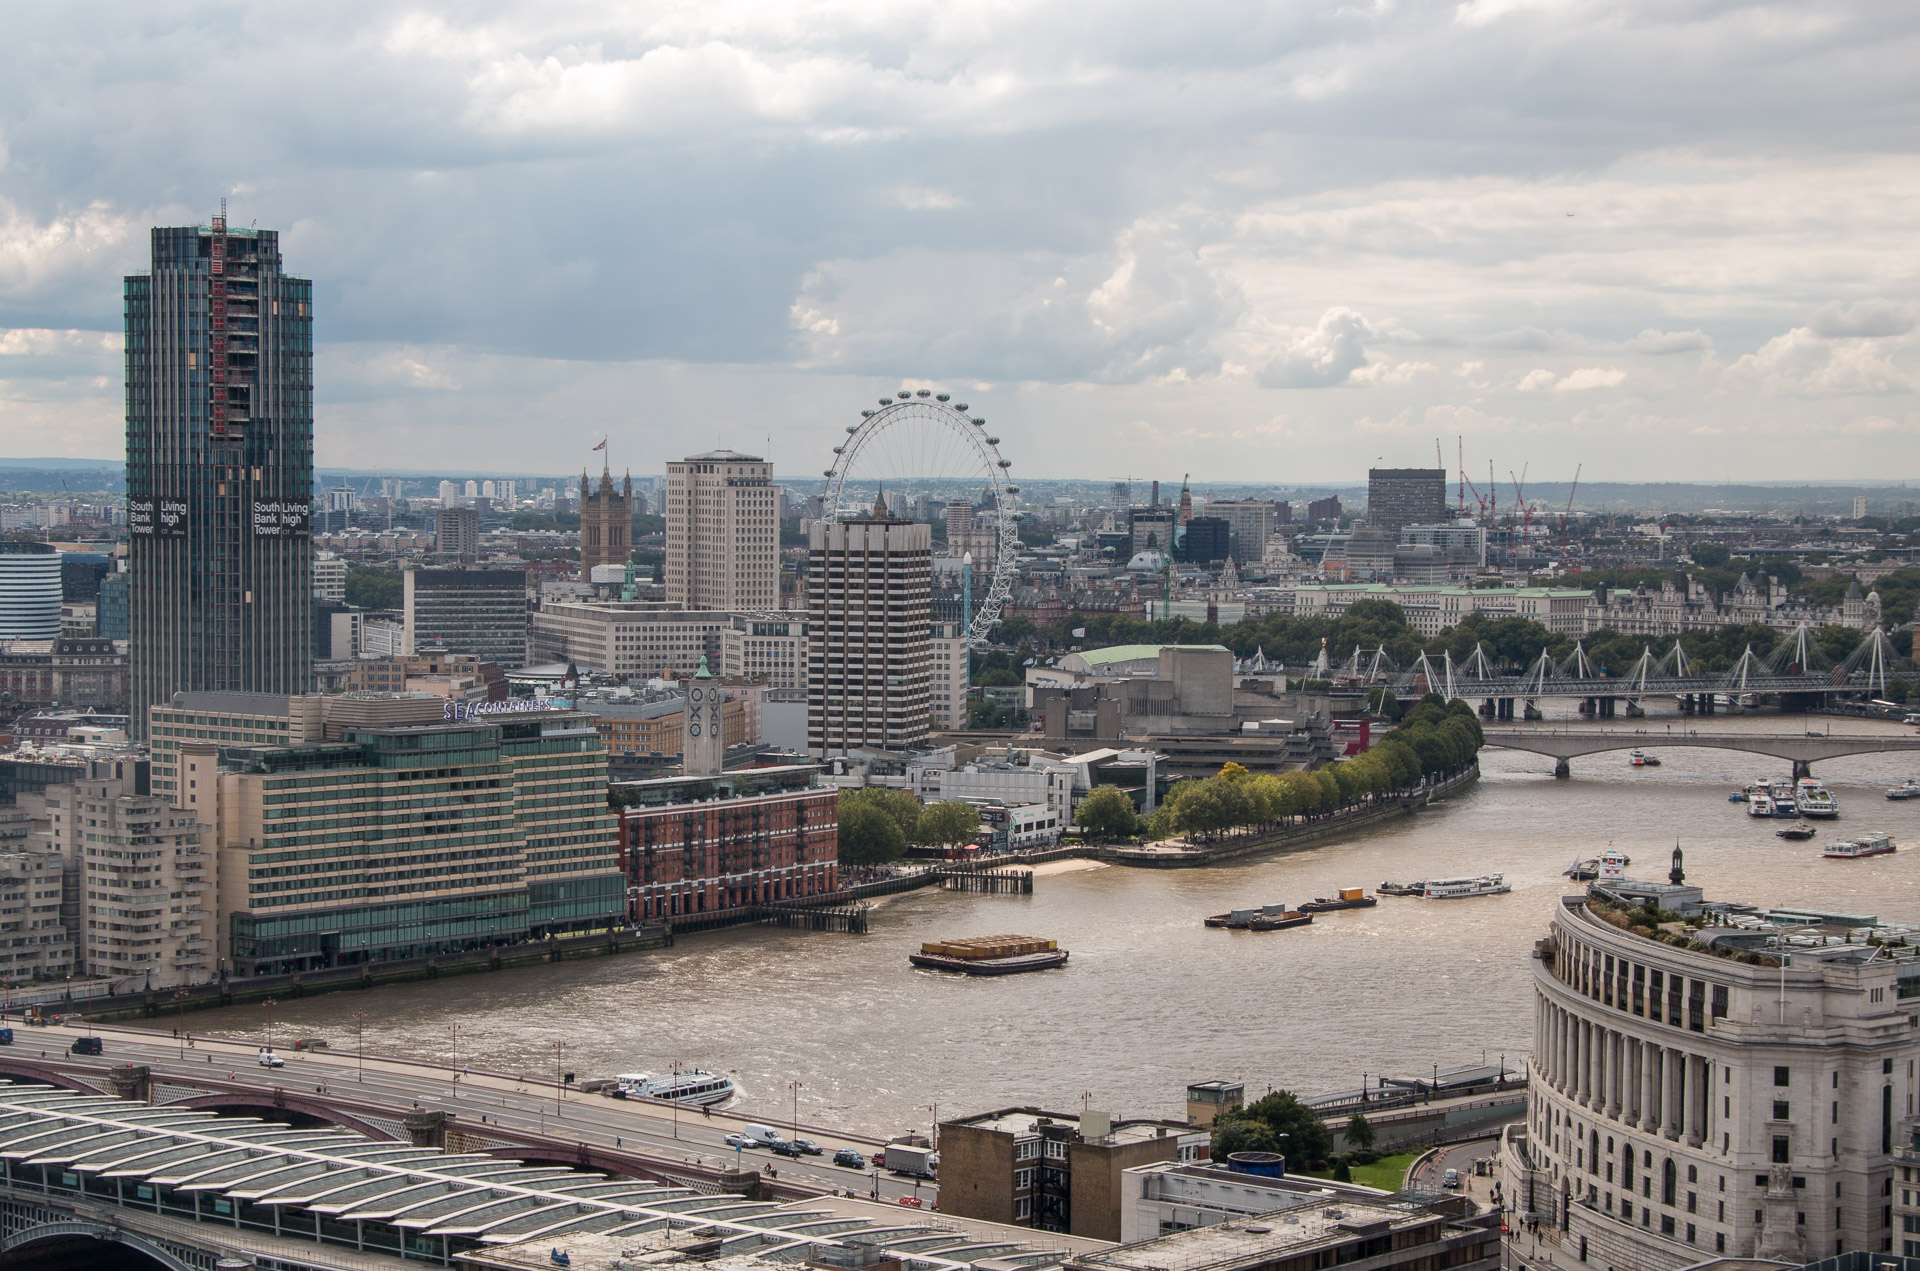 Views of London from the Golden Gallery at the top of the cupola of St. Paul's Cathedral